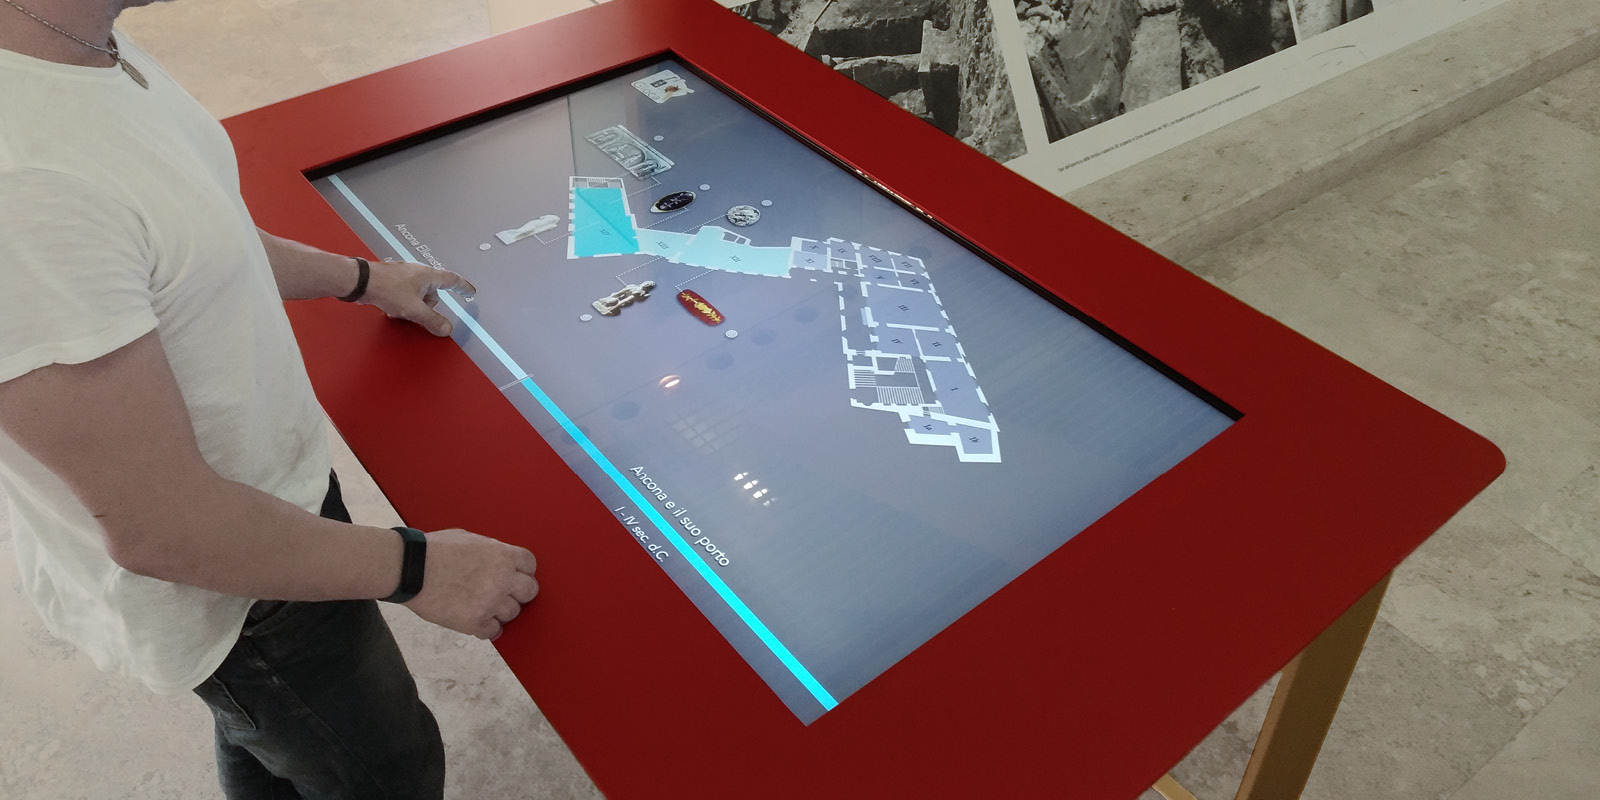 Touchwindow - The Museum experience becomes interactive!